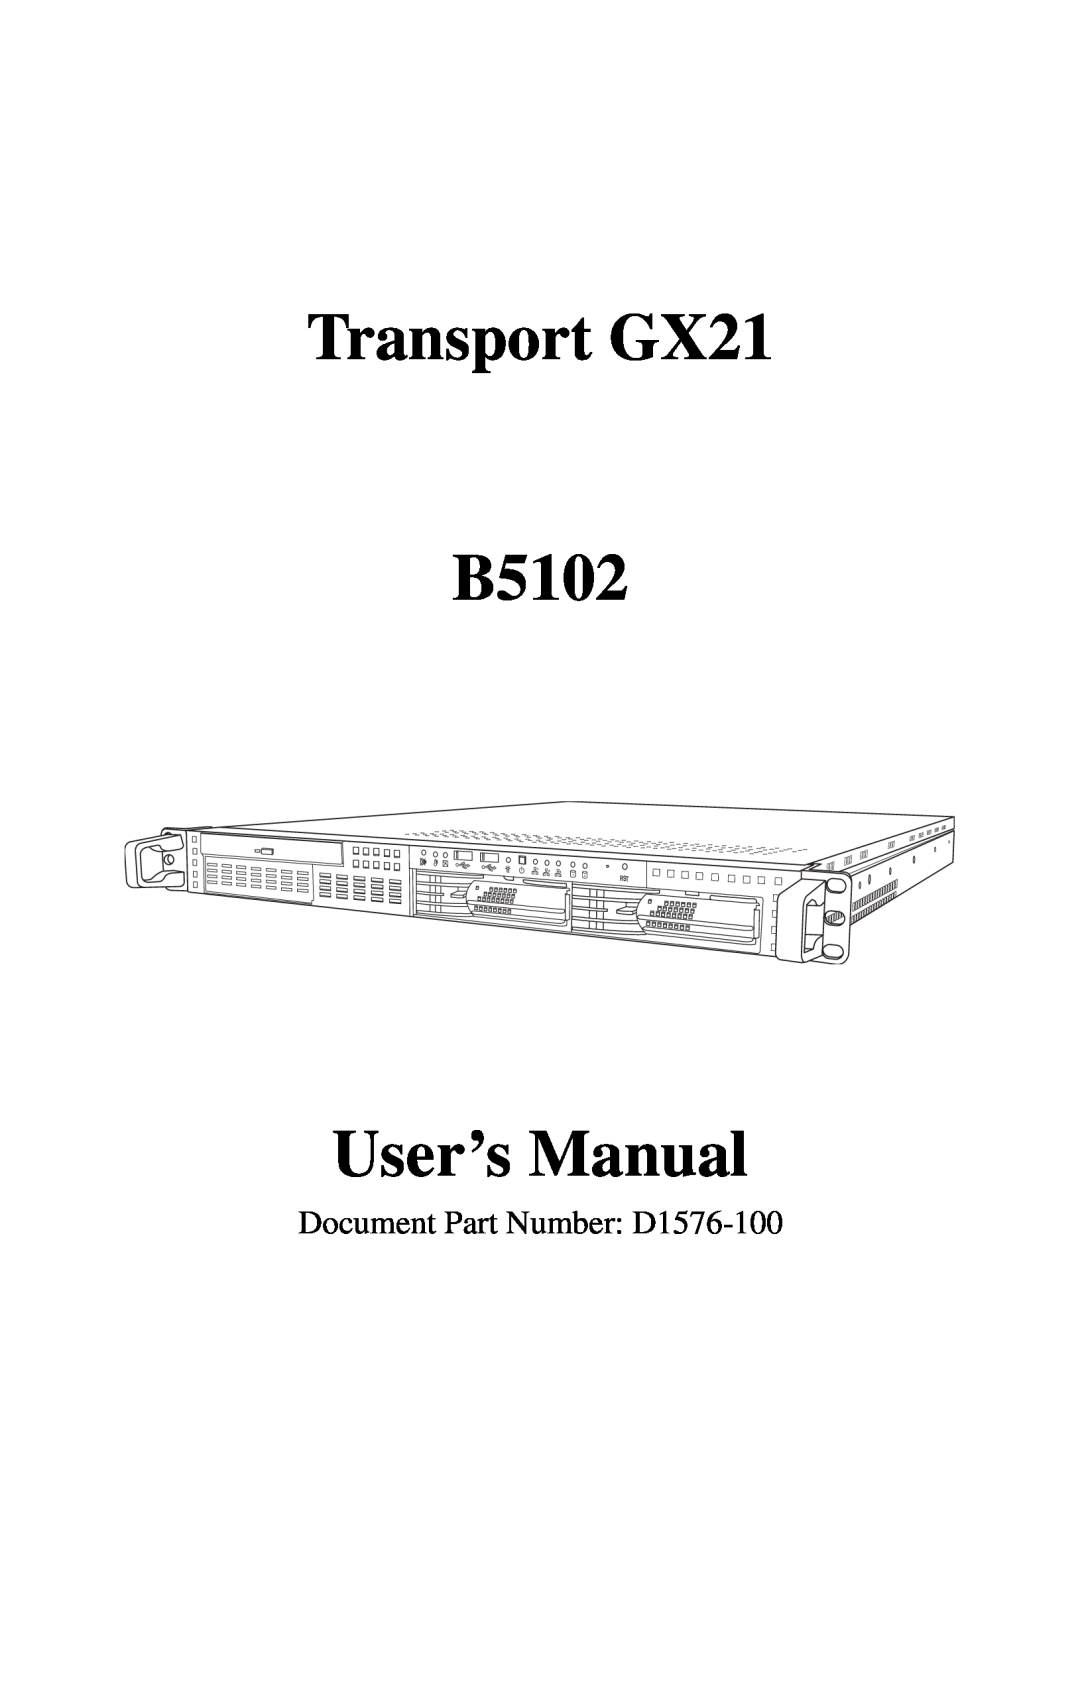 Tyan Computer manual Transport GX21 B5102, User’s Manual, Document Part Number D1576-100 